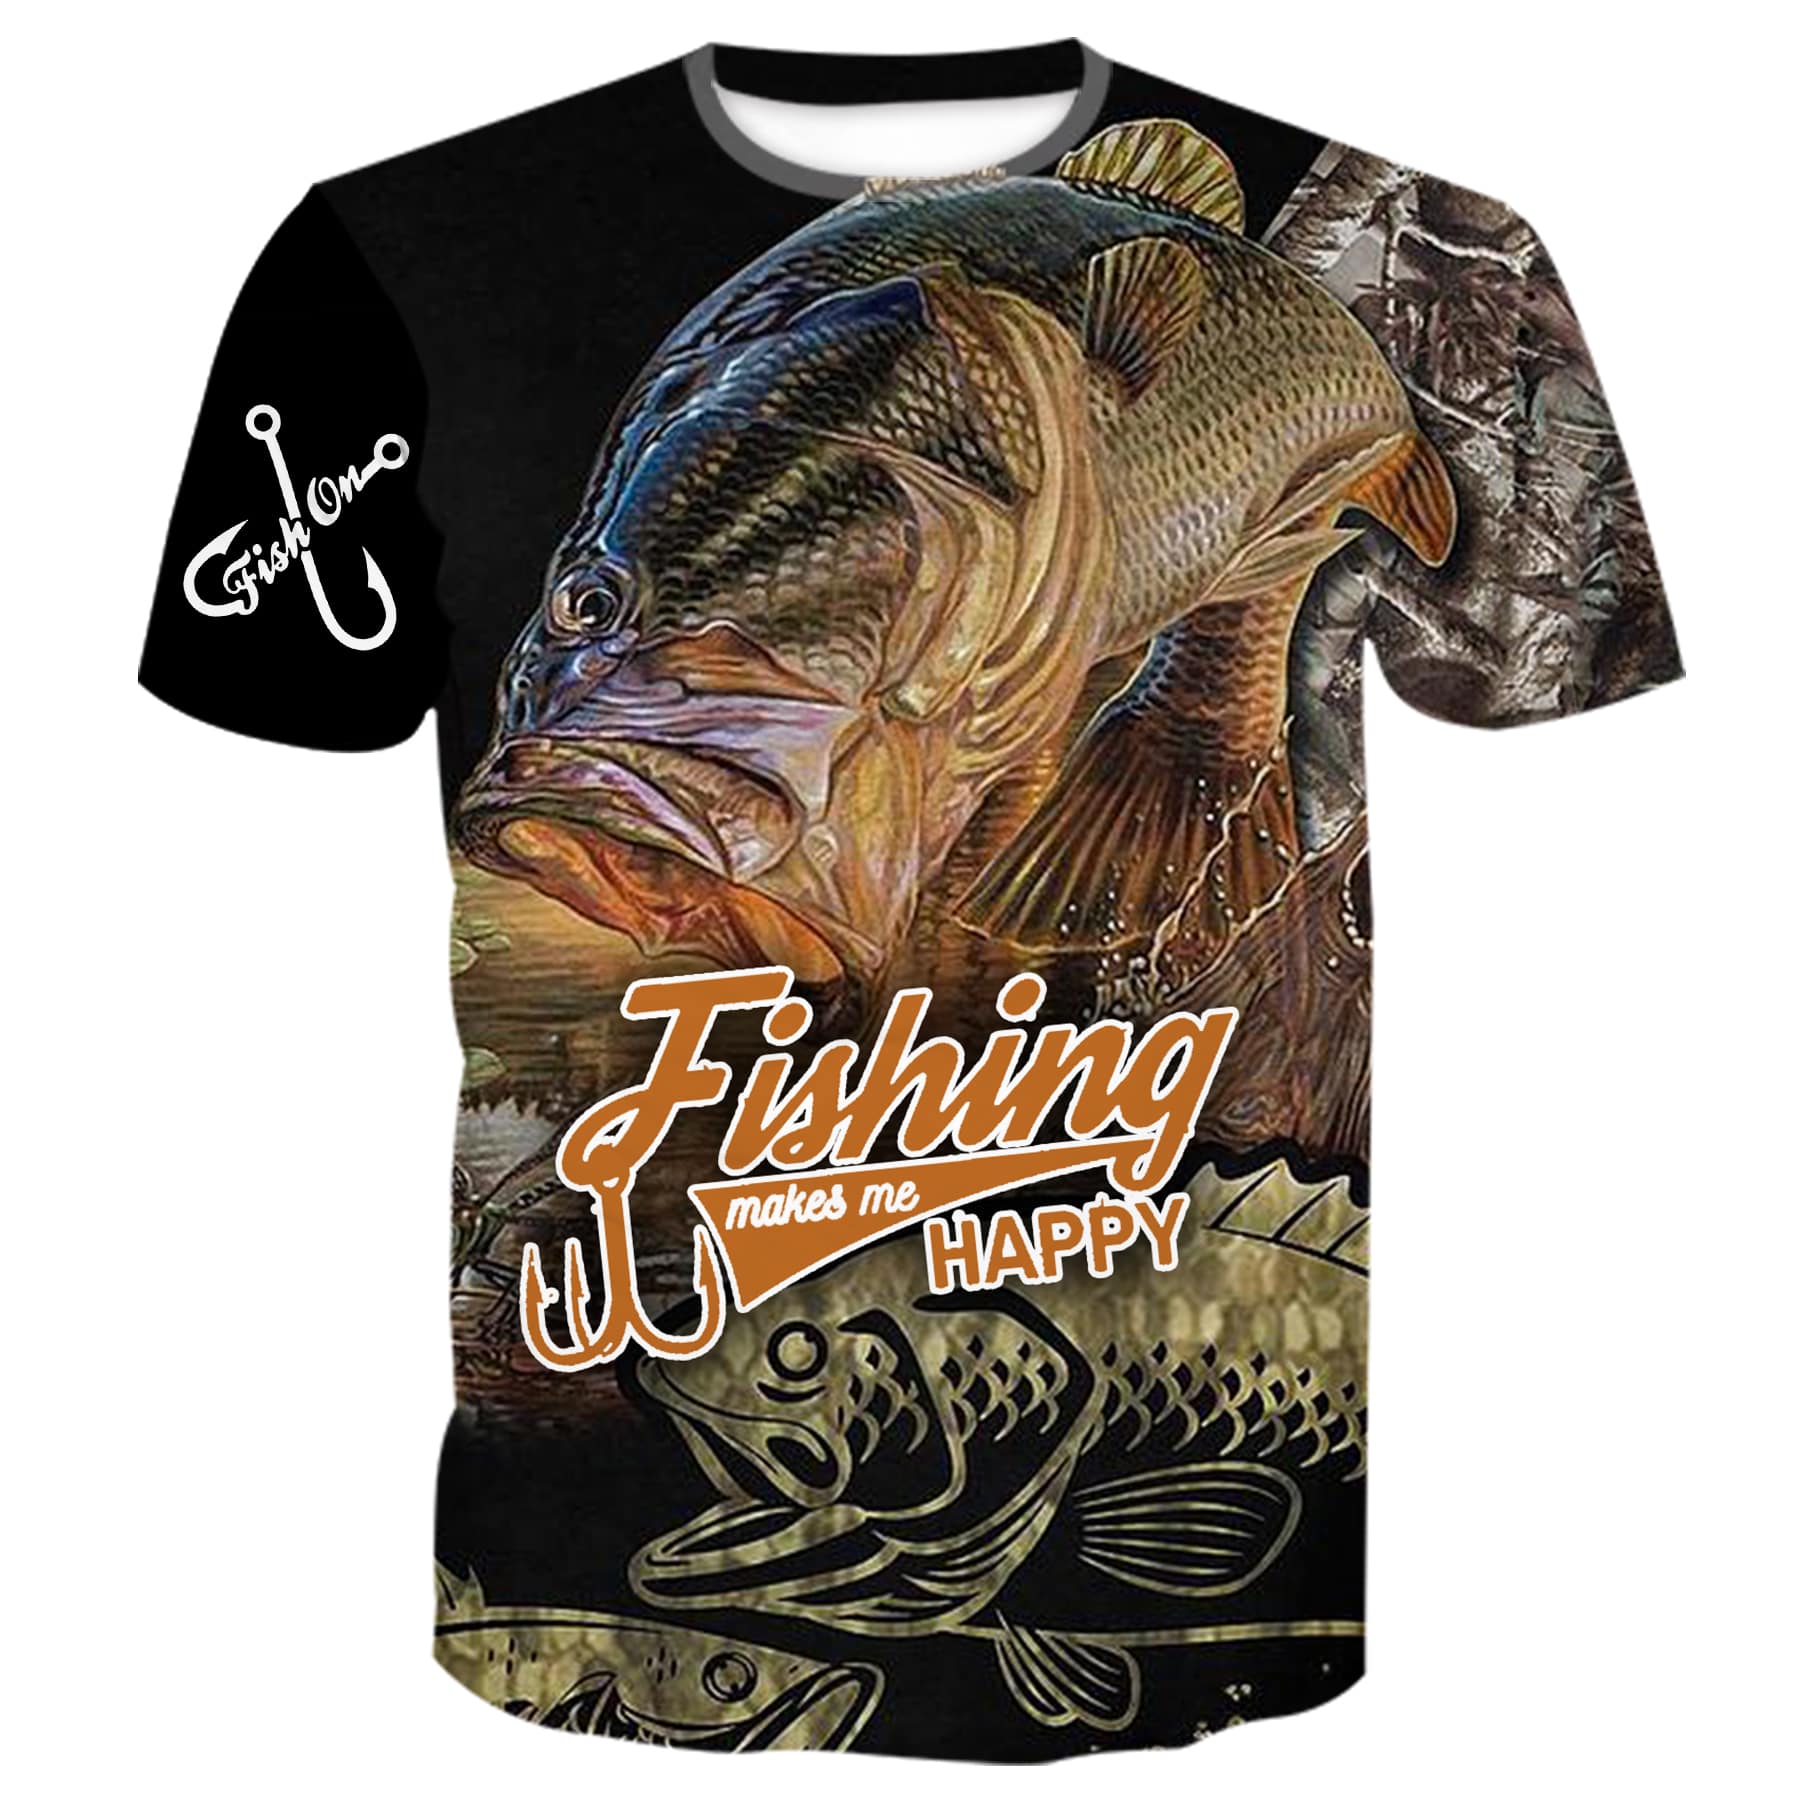 Bass fish design on a vibrant tshirt with text " Bass fishing makes me Happy"